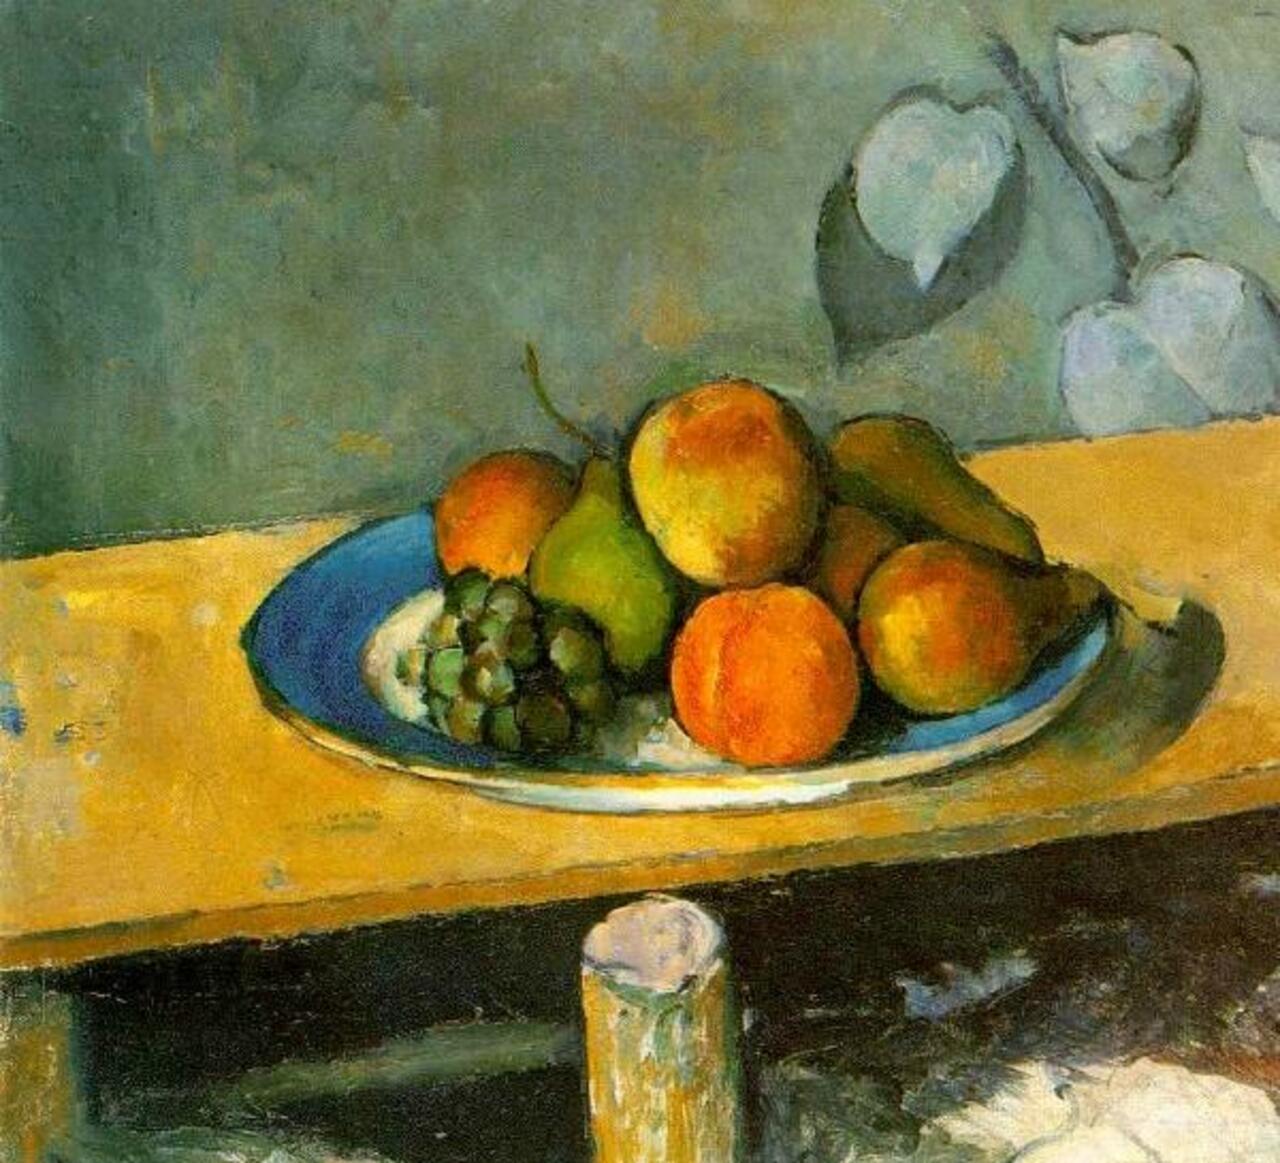 “@marisabeloyo: Paul Cézanne

'Apples, Peaches, Pears and Grapes'
#art http://t.co/8lB7AERUjJ”